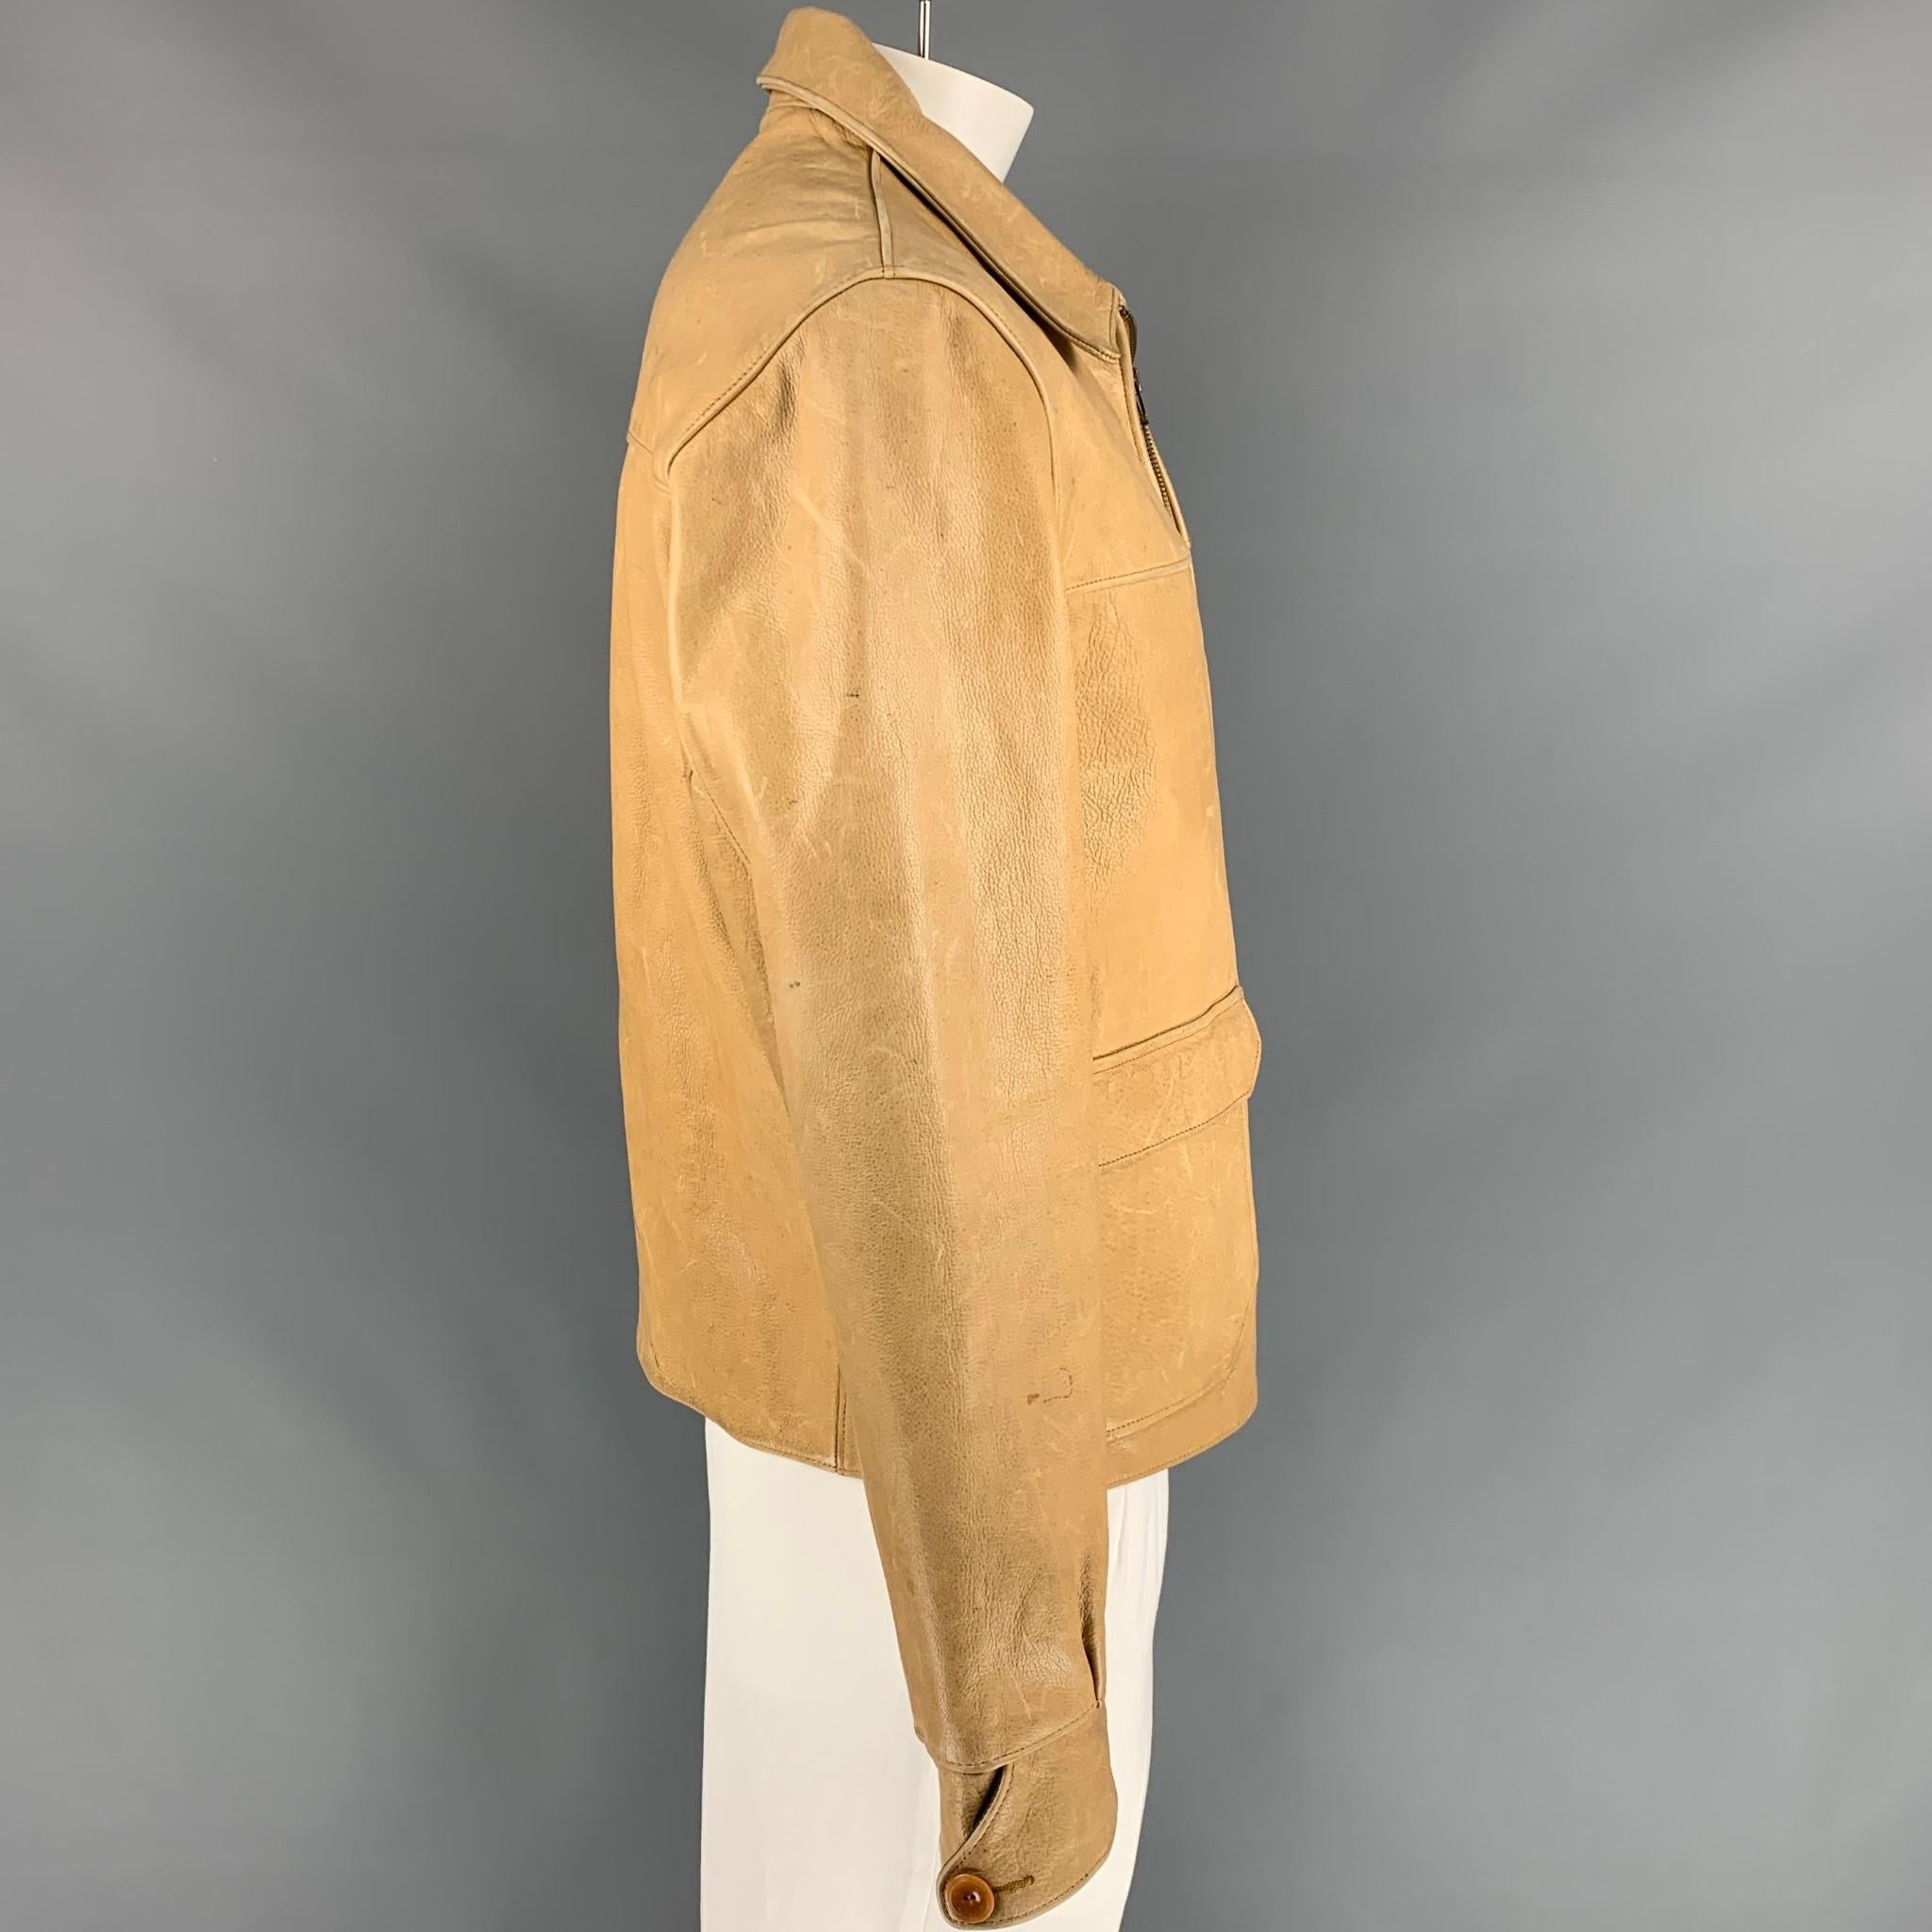 RRL by RALPH LAUREN jacket comes in a beige leather with a plaid liner featuring large flap pockets, pointed collar, and a full zip up closure. 

Good Pre-Owned Condition.
Marked: L
Original Retail Price: $1,800.00

Measurements:

Shoulder: 20